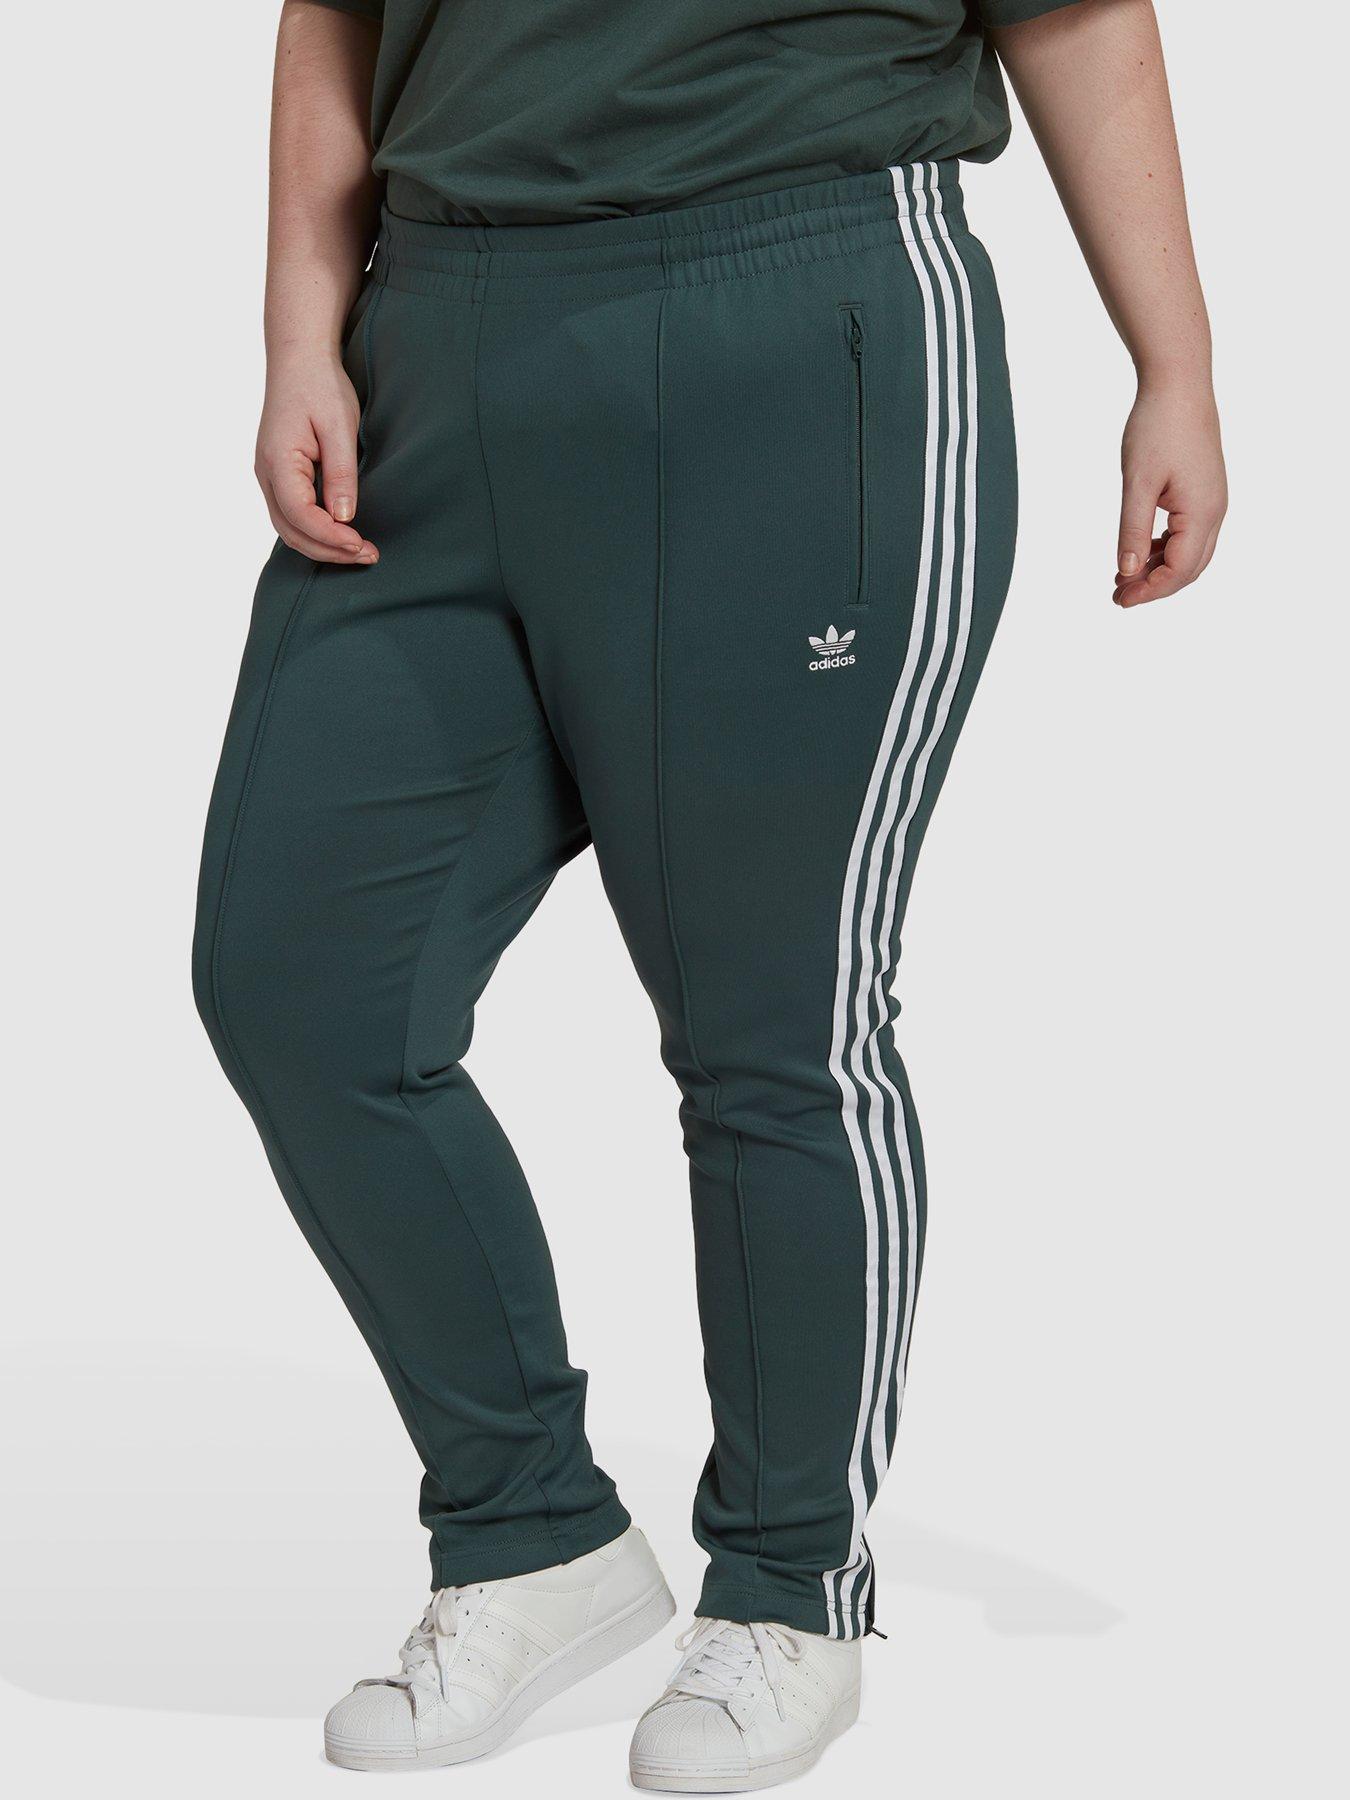 simpatía joyería Cambiable Tracksuit Bottoms | Adidas | Tracksuits | Womens sports clothing | Sports &  leisure | www.littlewoods.com